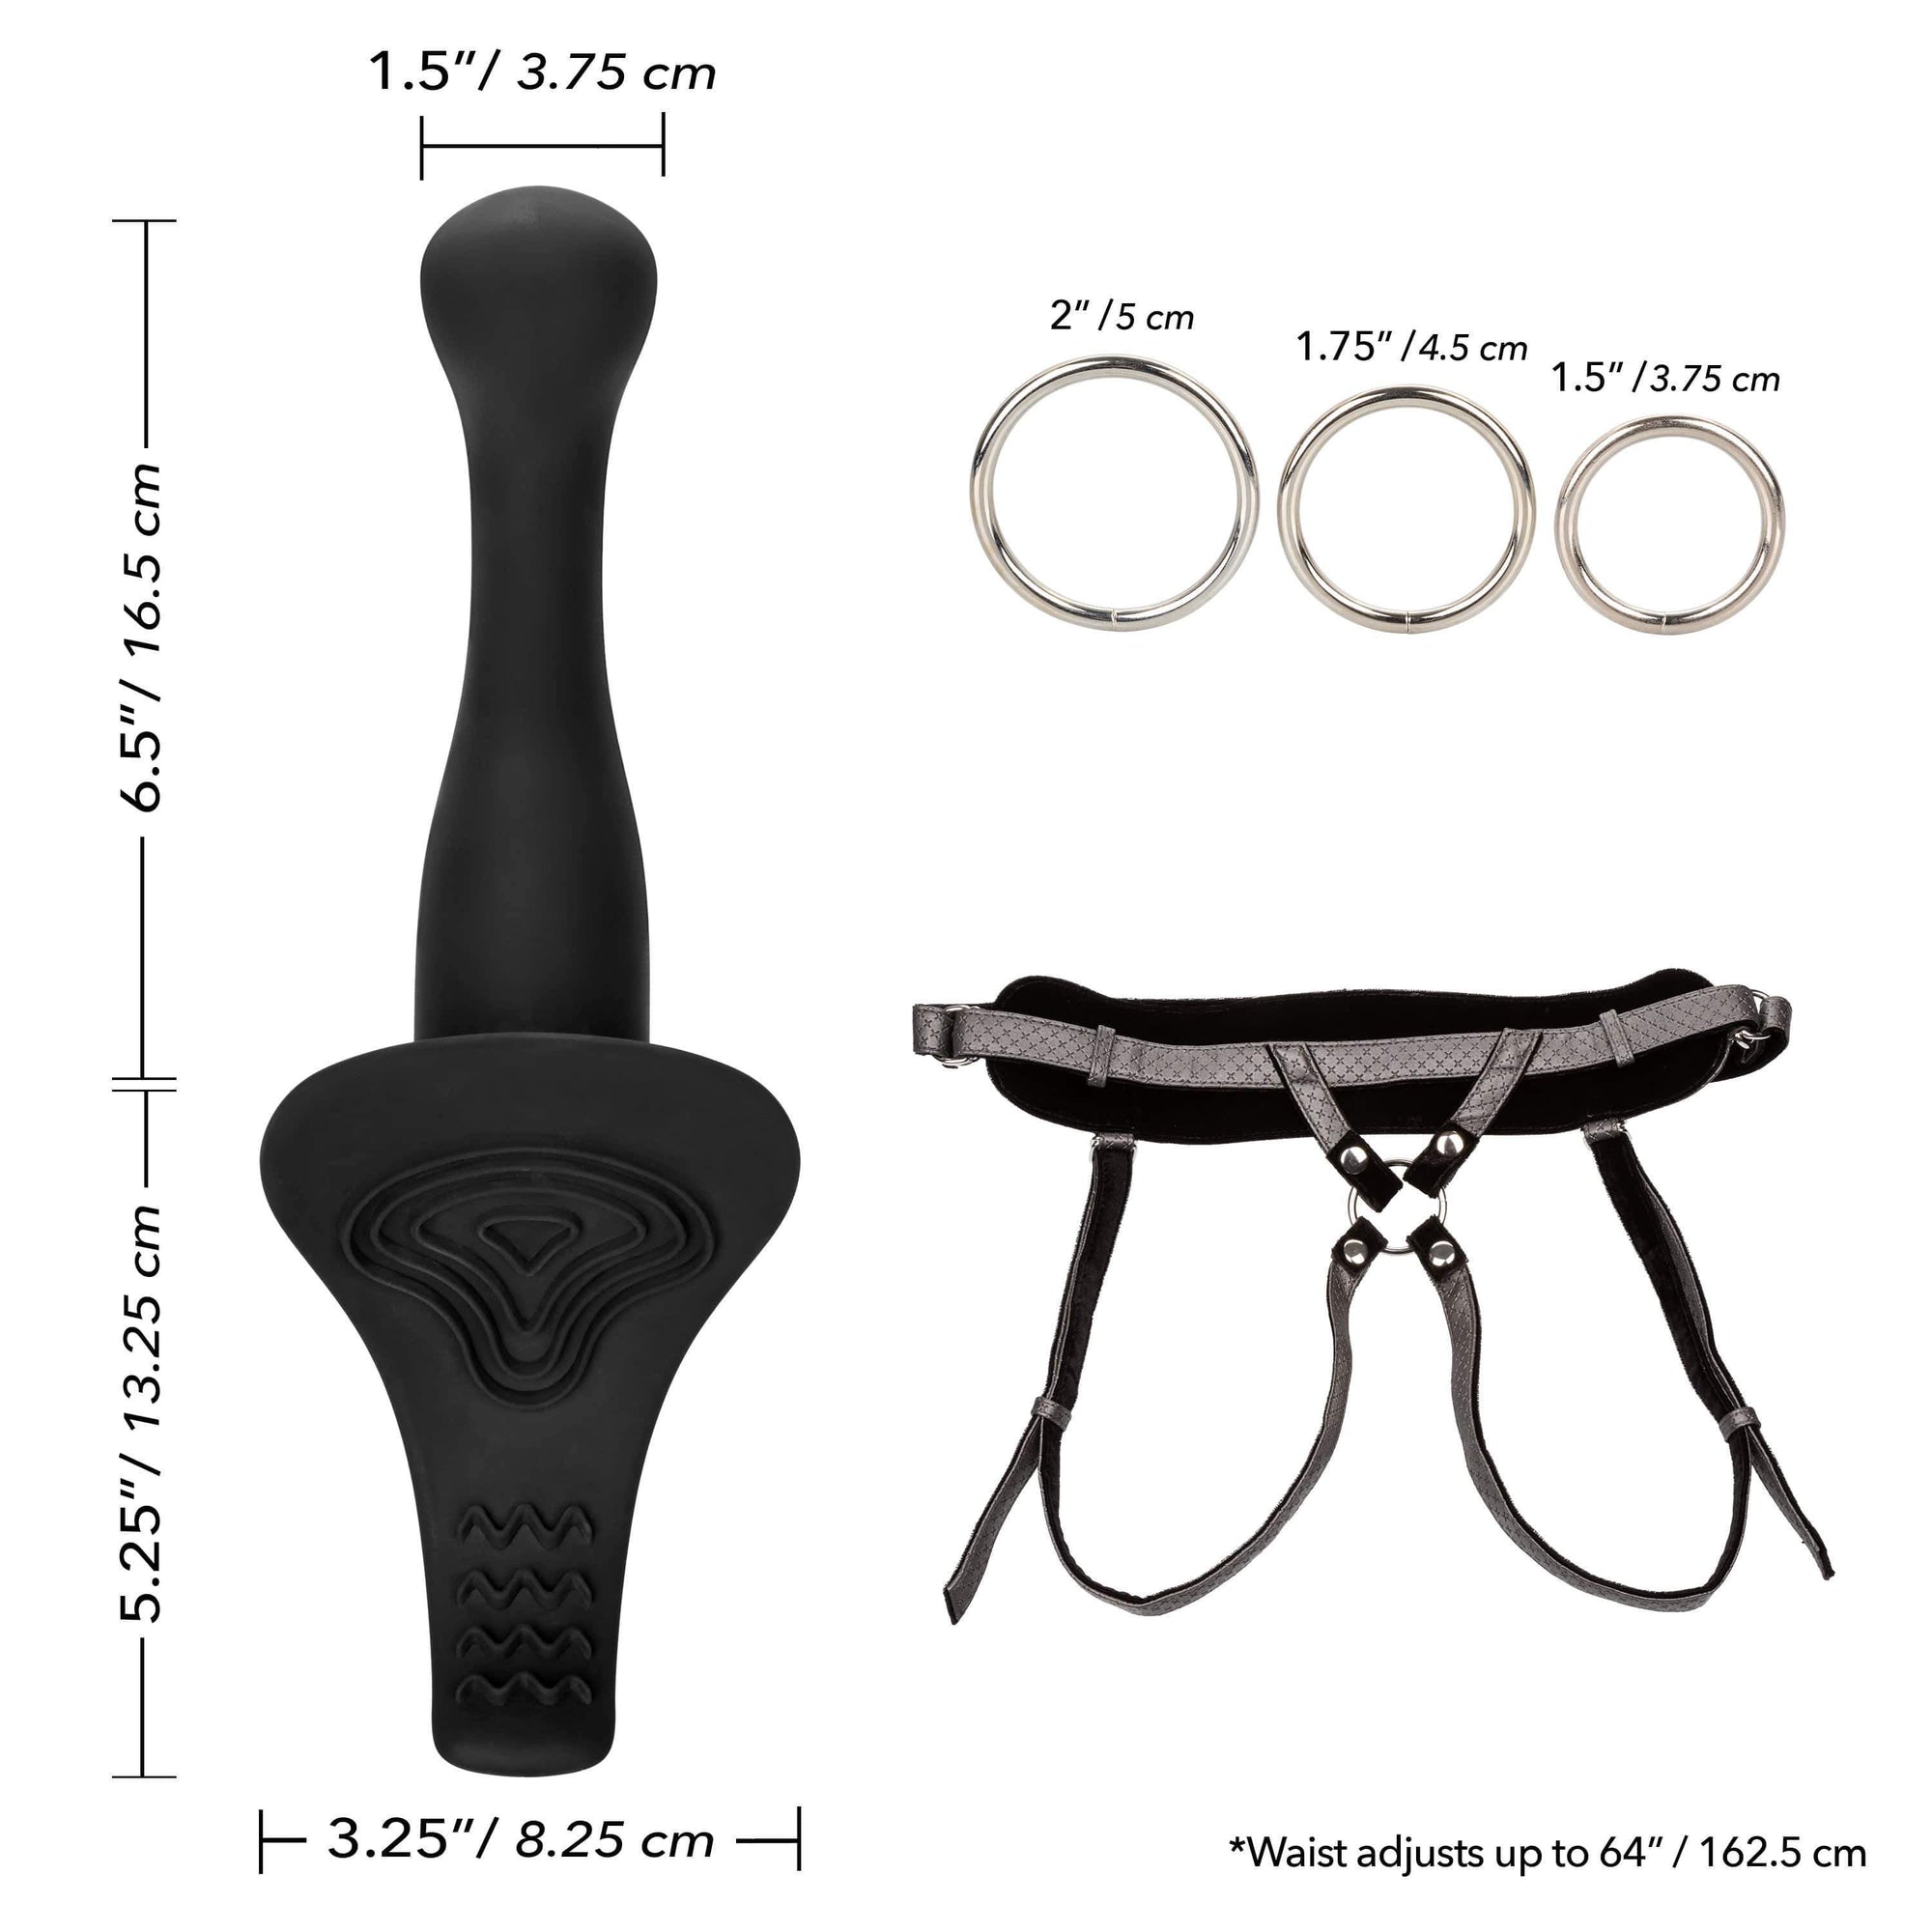 California Exotics - Her Royal Harness Crotchless Strap On The Royal Vibrating Set (Black) Strap On with Dildo for Reverse Insertion (Vibration) Rechargeable 716770094841 CherryAffairs